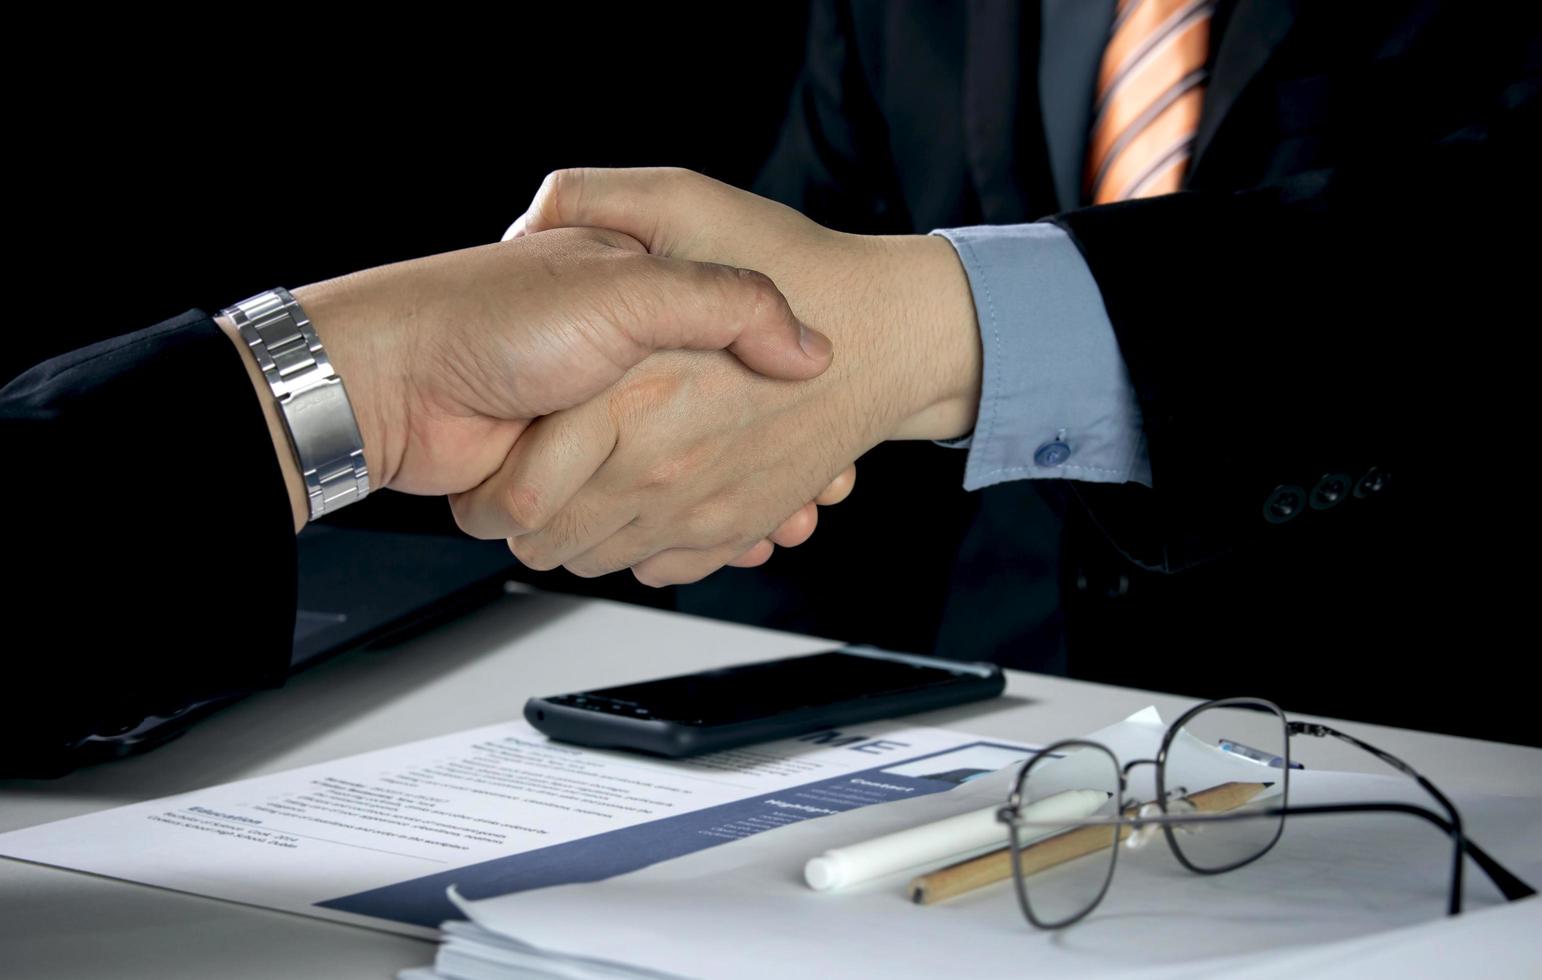 businessman and job seeker shake hands after agreeing to accept job and approve him employee at company. or joint venture agreement between two business. Concept of recruitment, successful negotiation photo